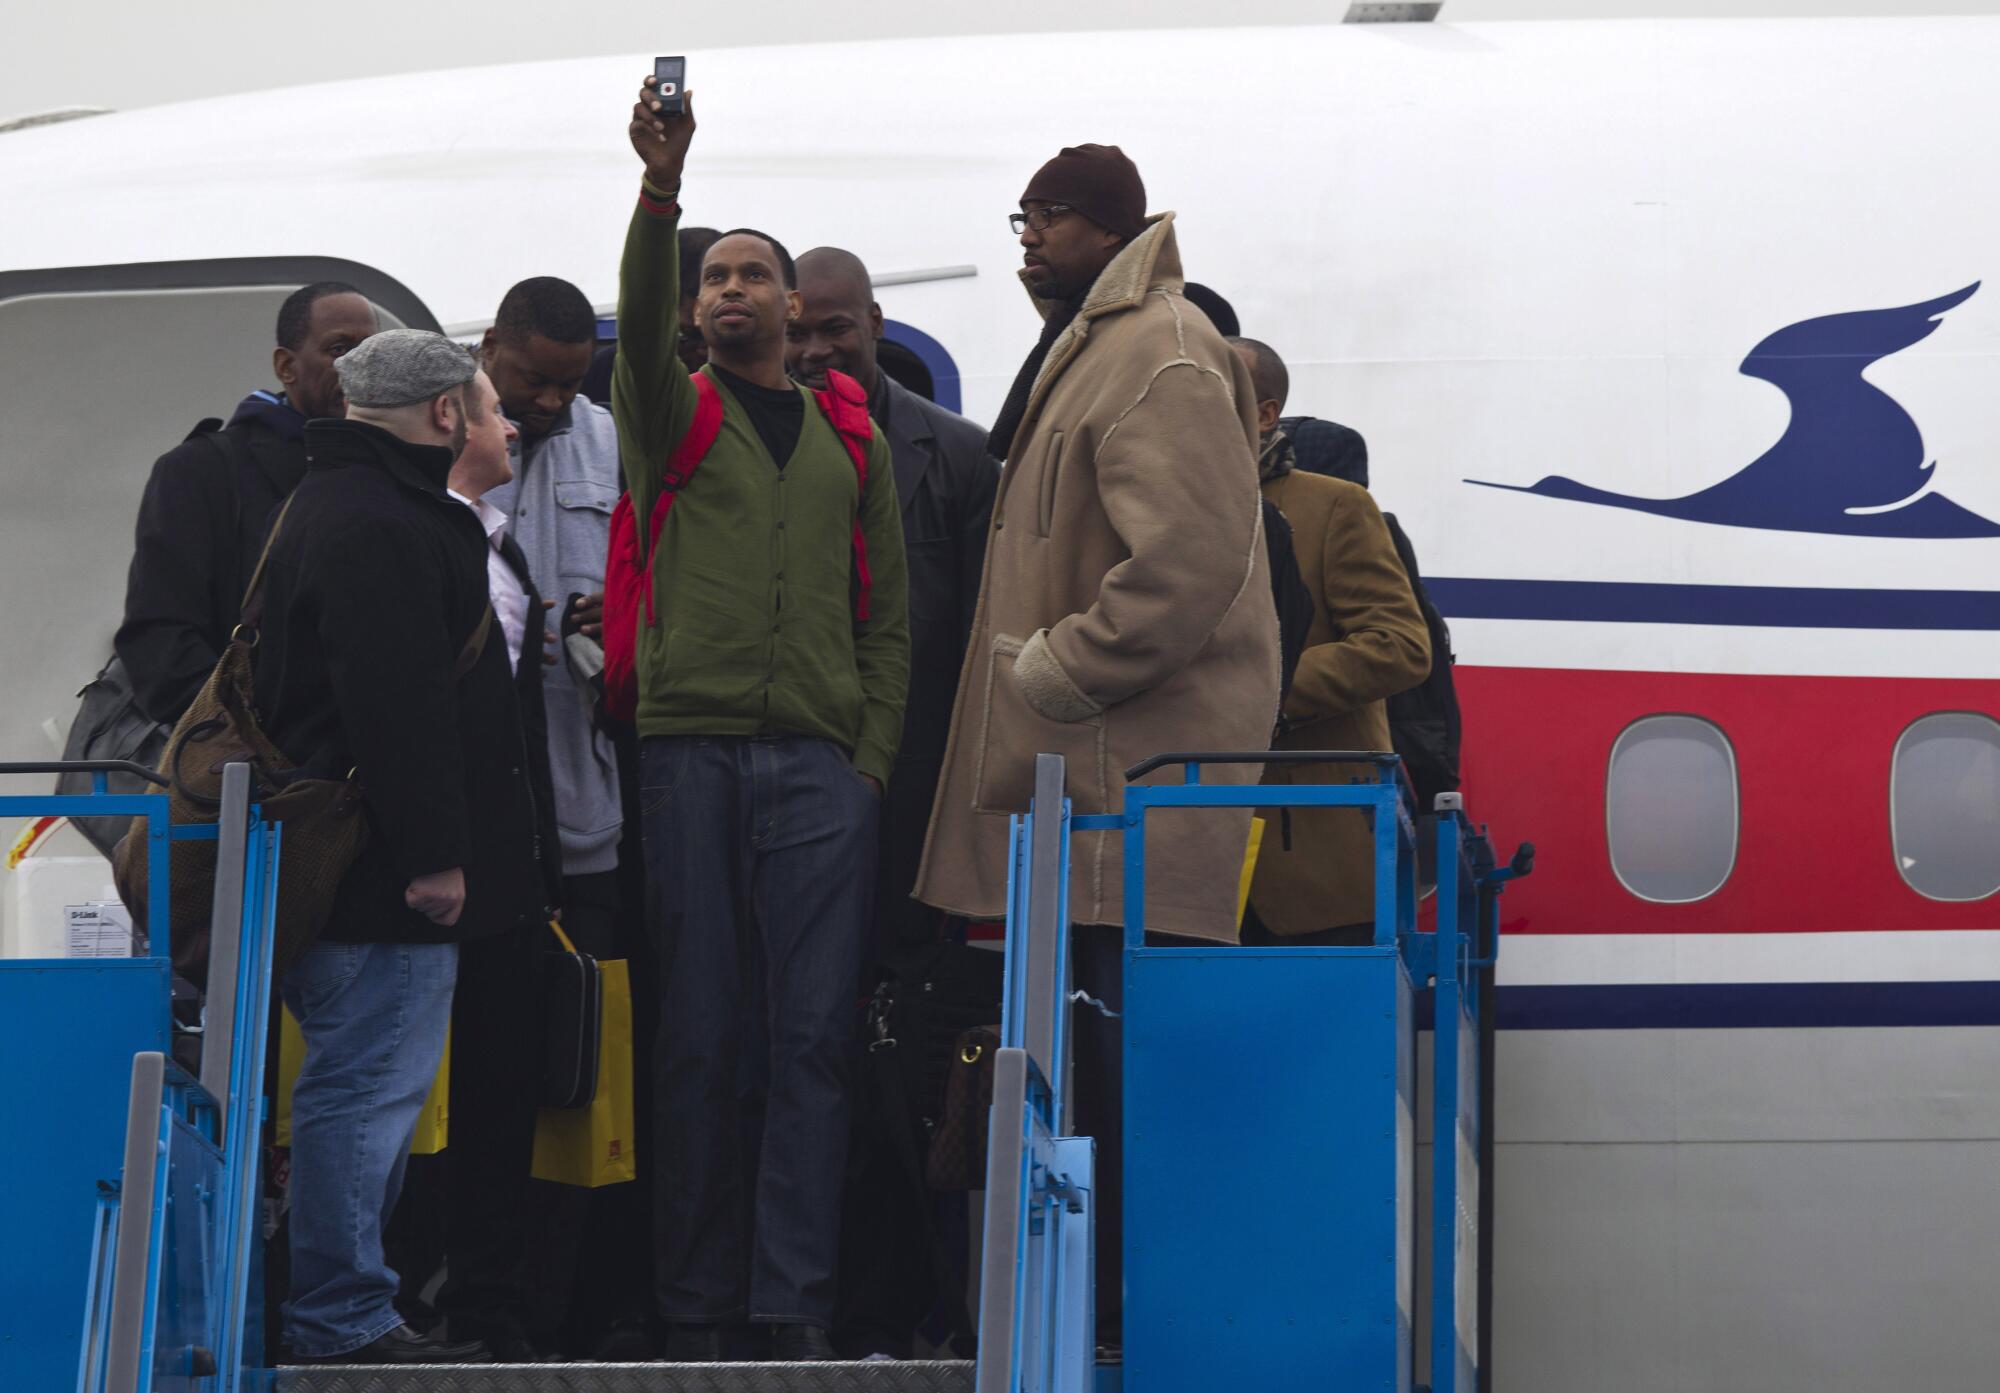 Vin Baker, right, waits as Jerry Dupree, center, takes photos after their arrival in North Korea with Dennis Rodman.